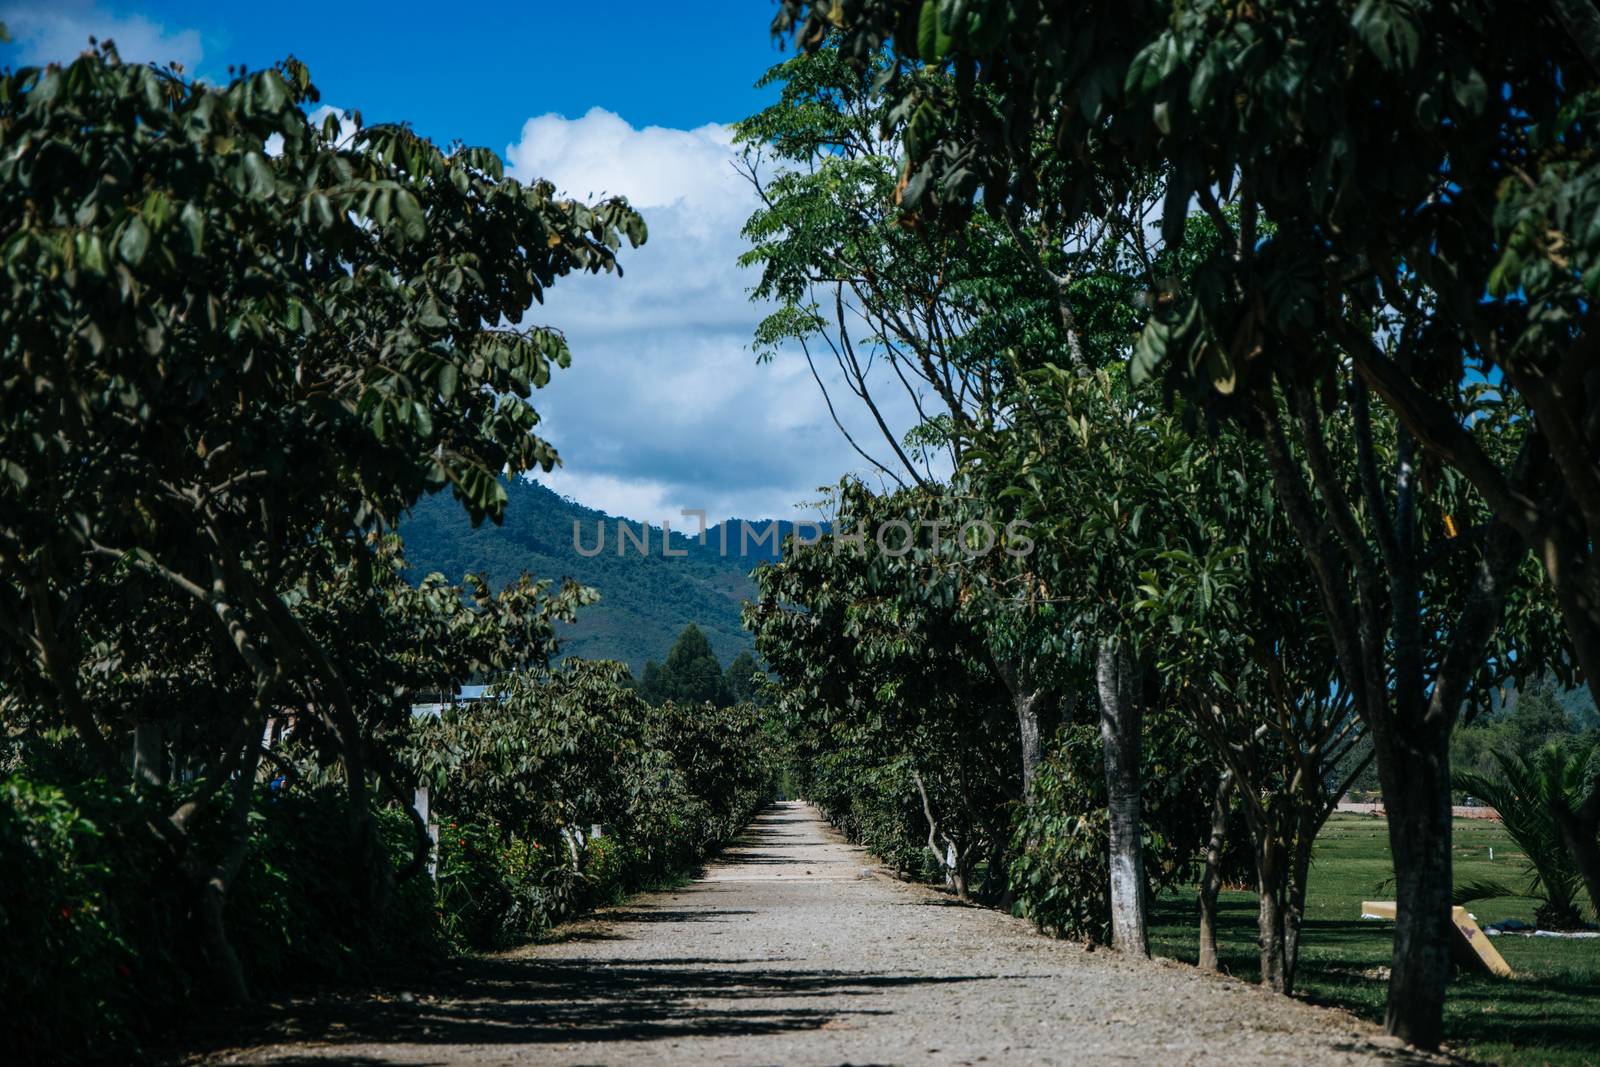 A road full of bush, a view more of the wonderful city of Oxapampa located in the Peruvian jungle center